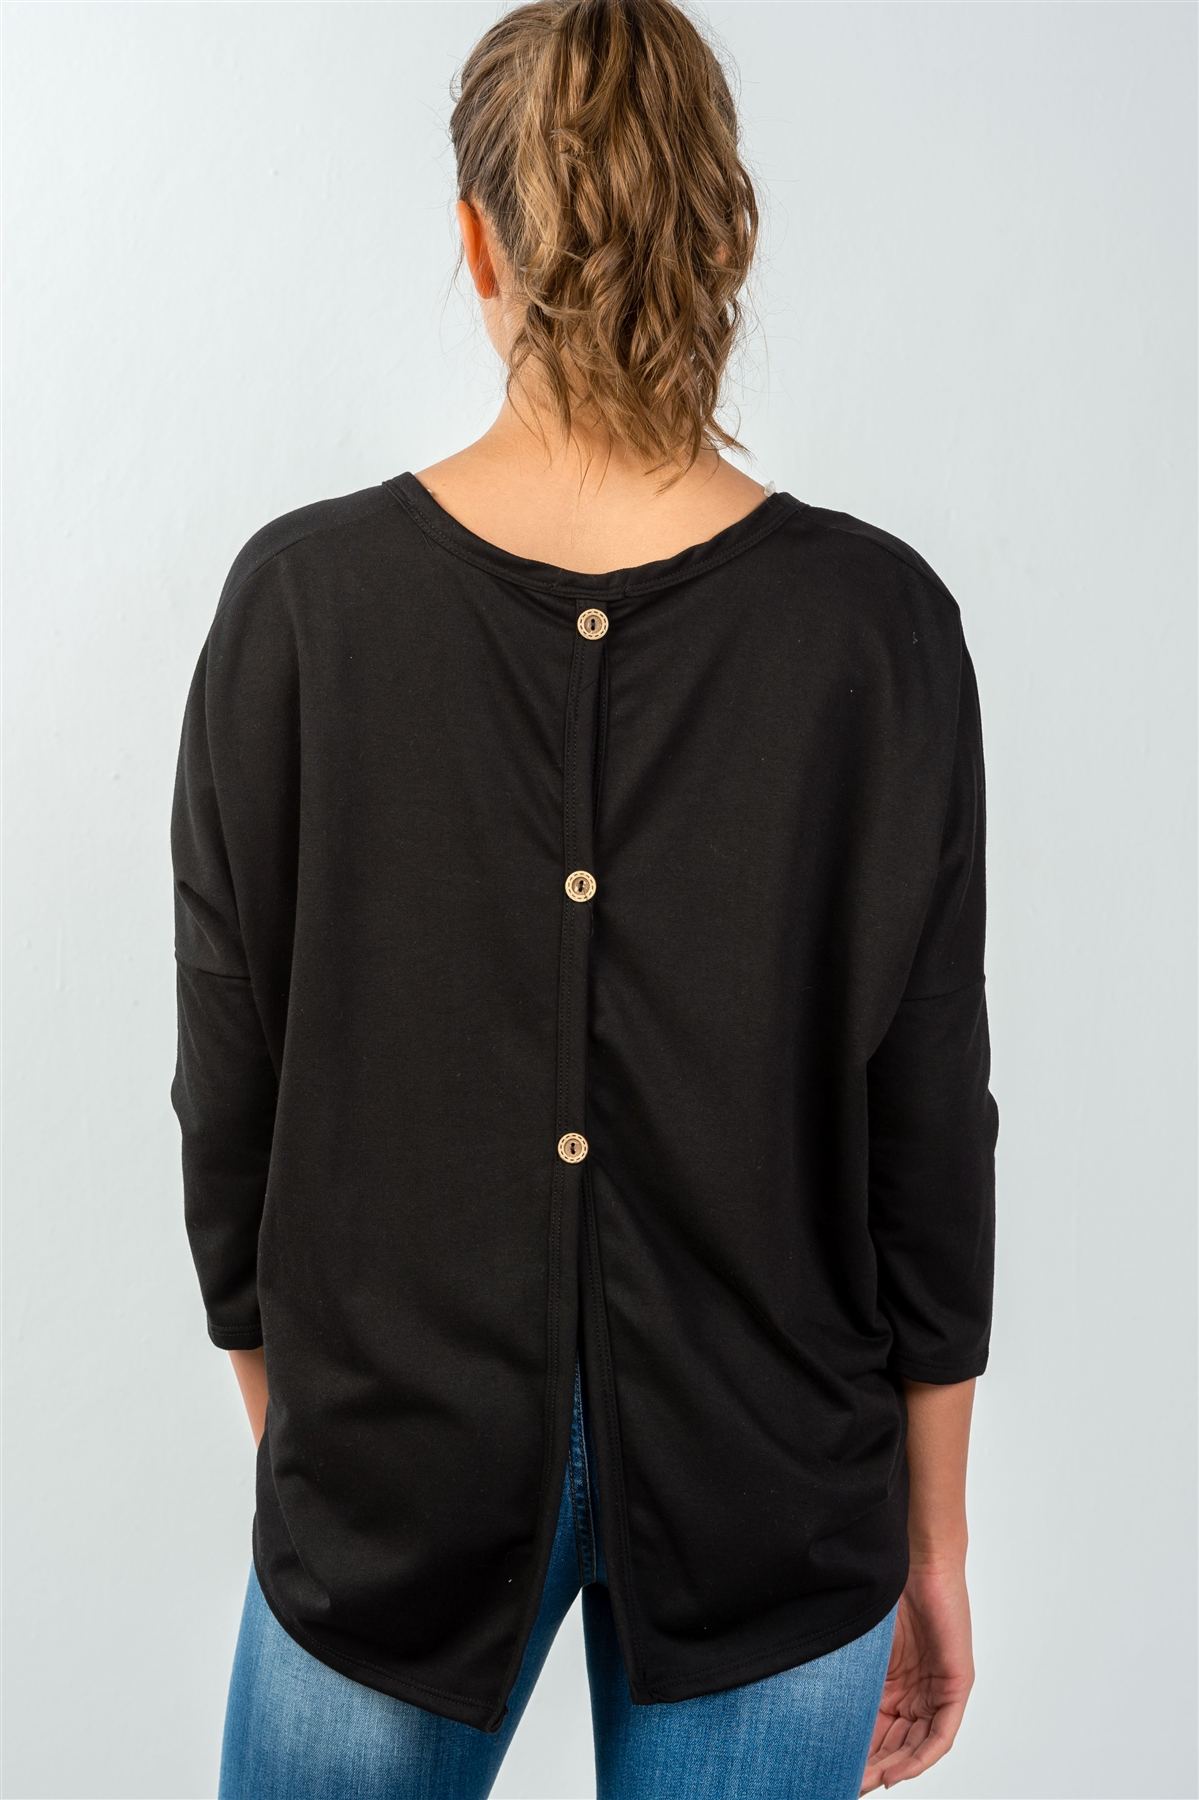 Ladies fashion black button up back long sleeve sweater